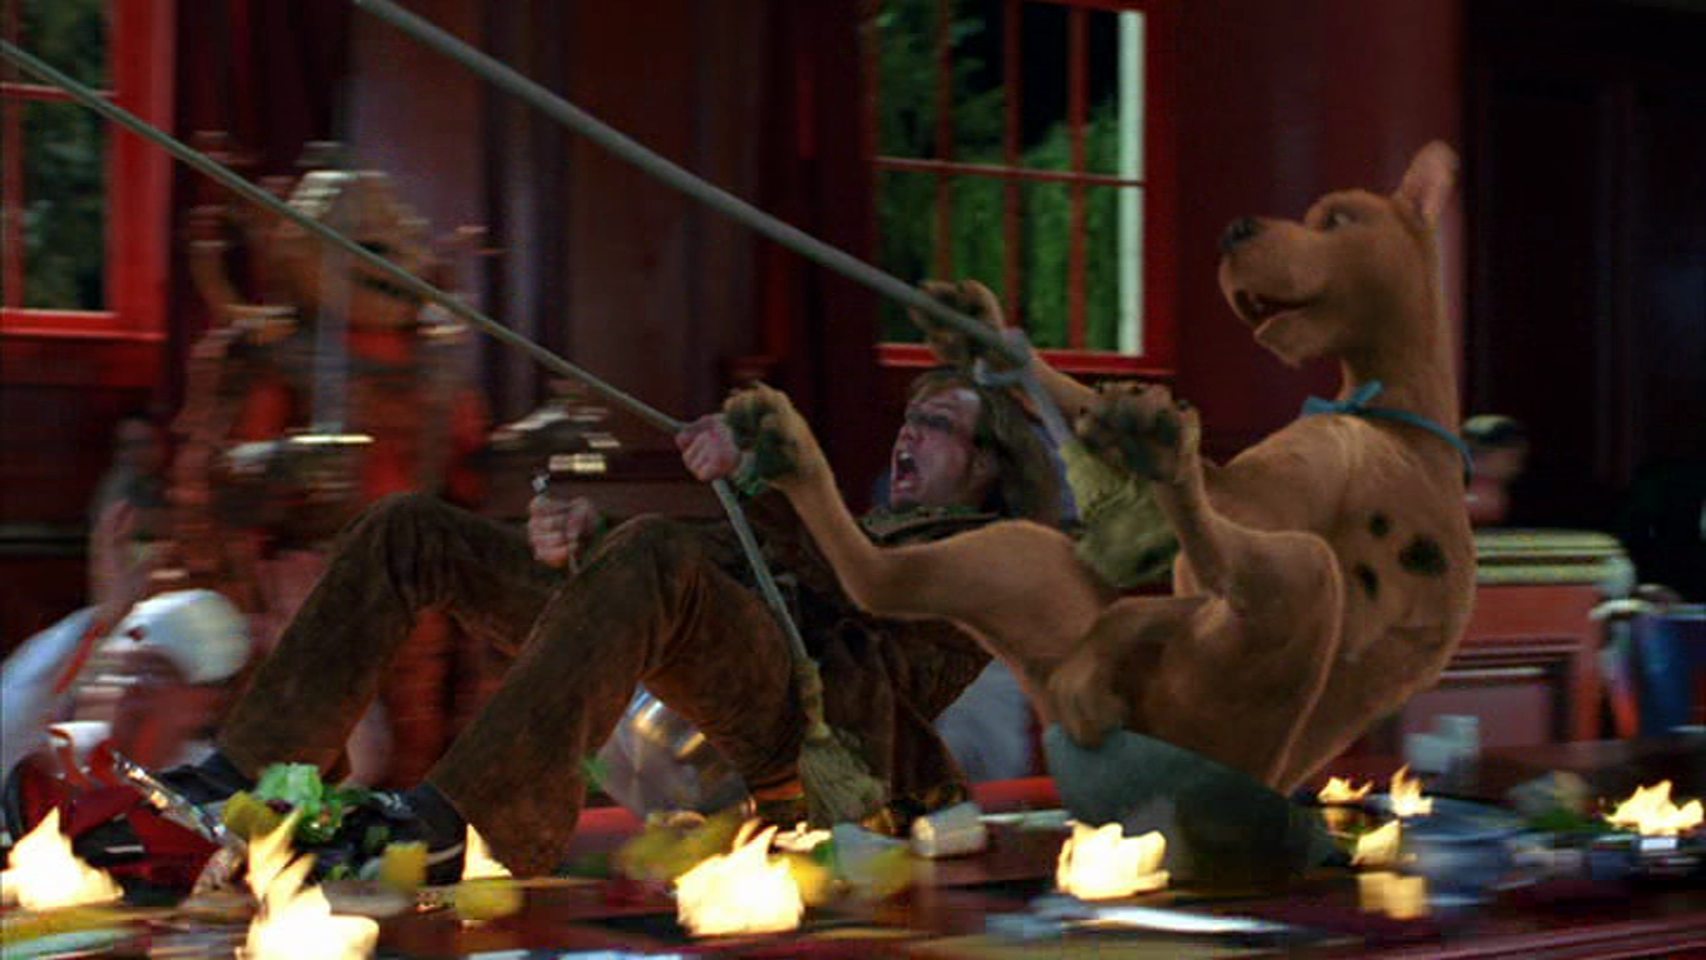 Scooby-Doo Image: Scooby Doo 2: Monsters Unleashed.